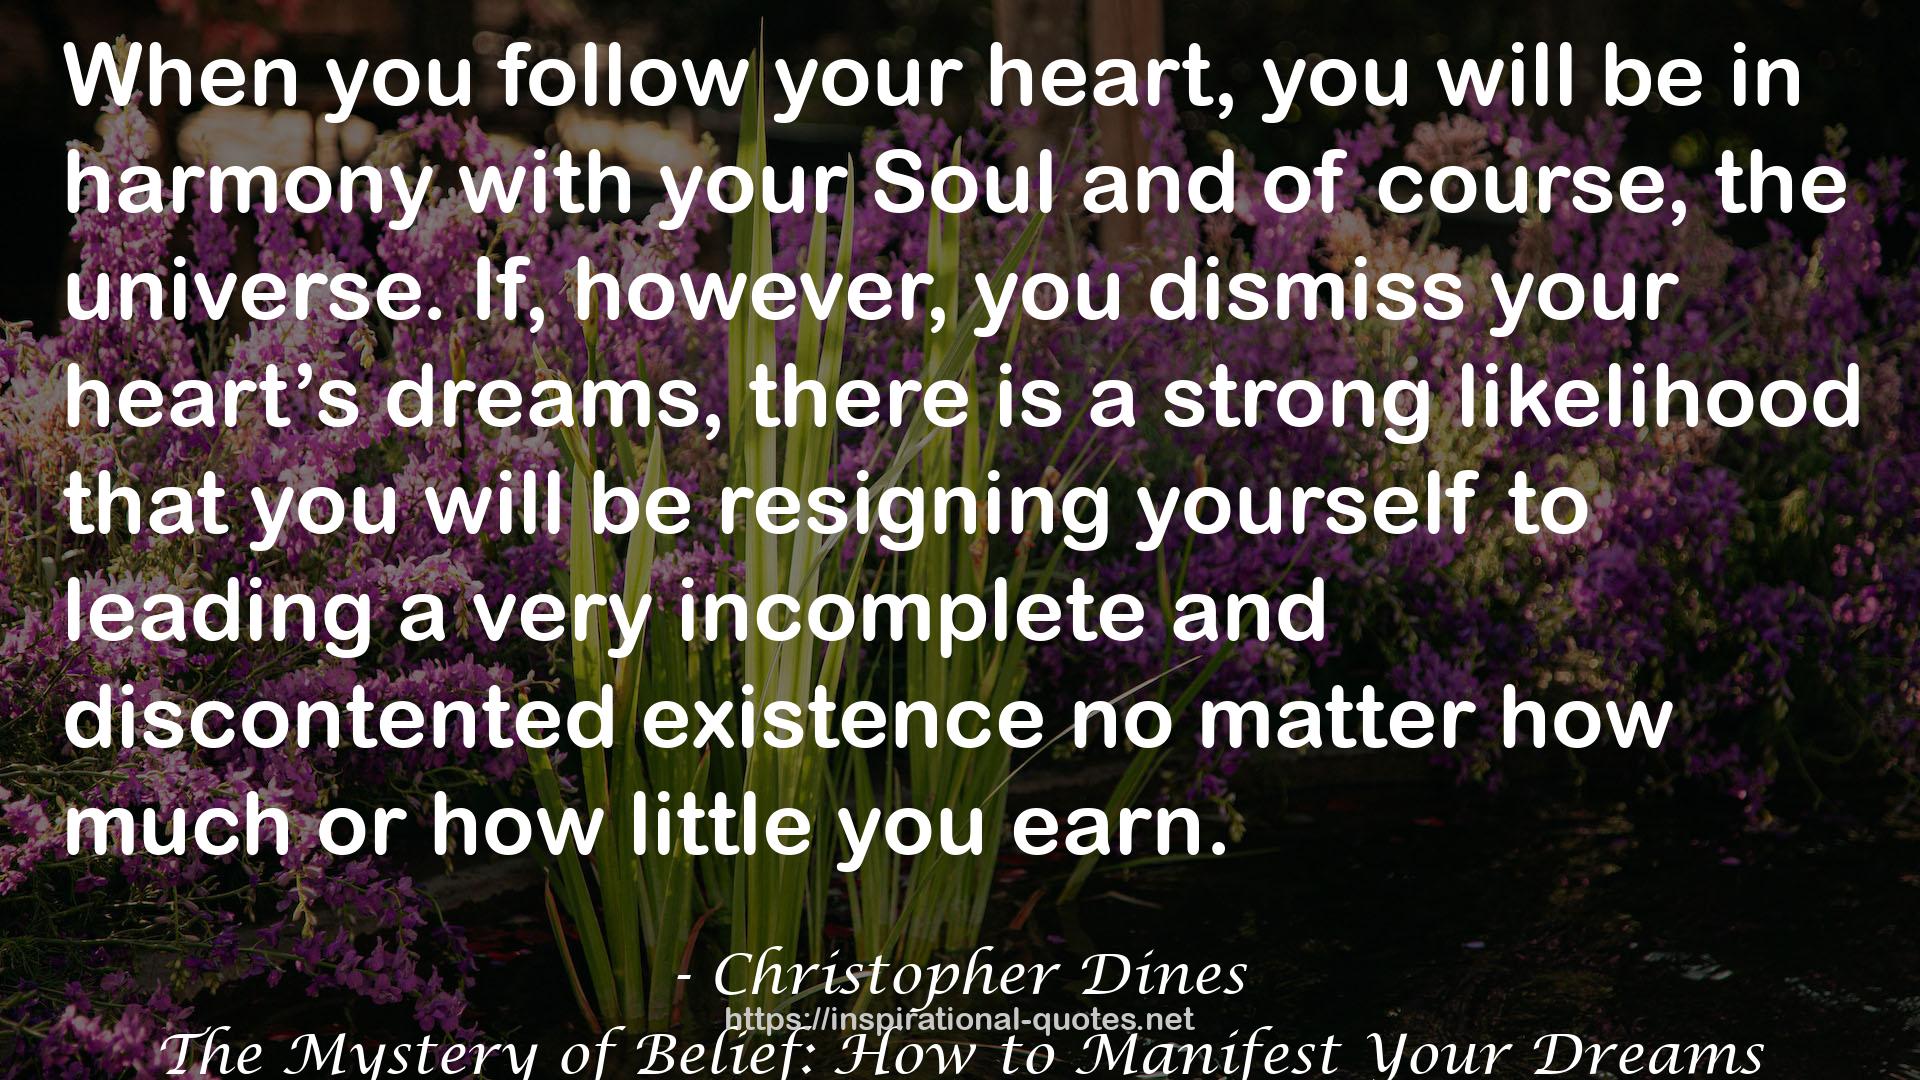 The Mystery of Belief: How to Manifest Your Dreams QUOTES